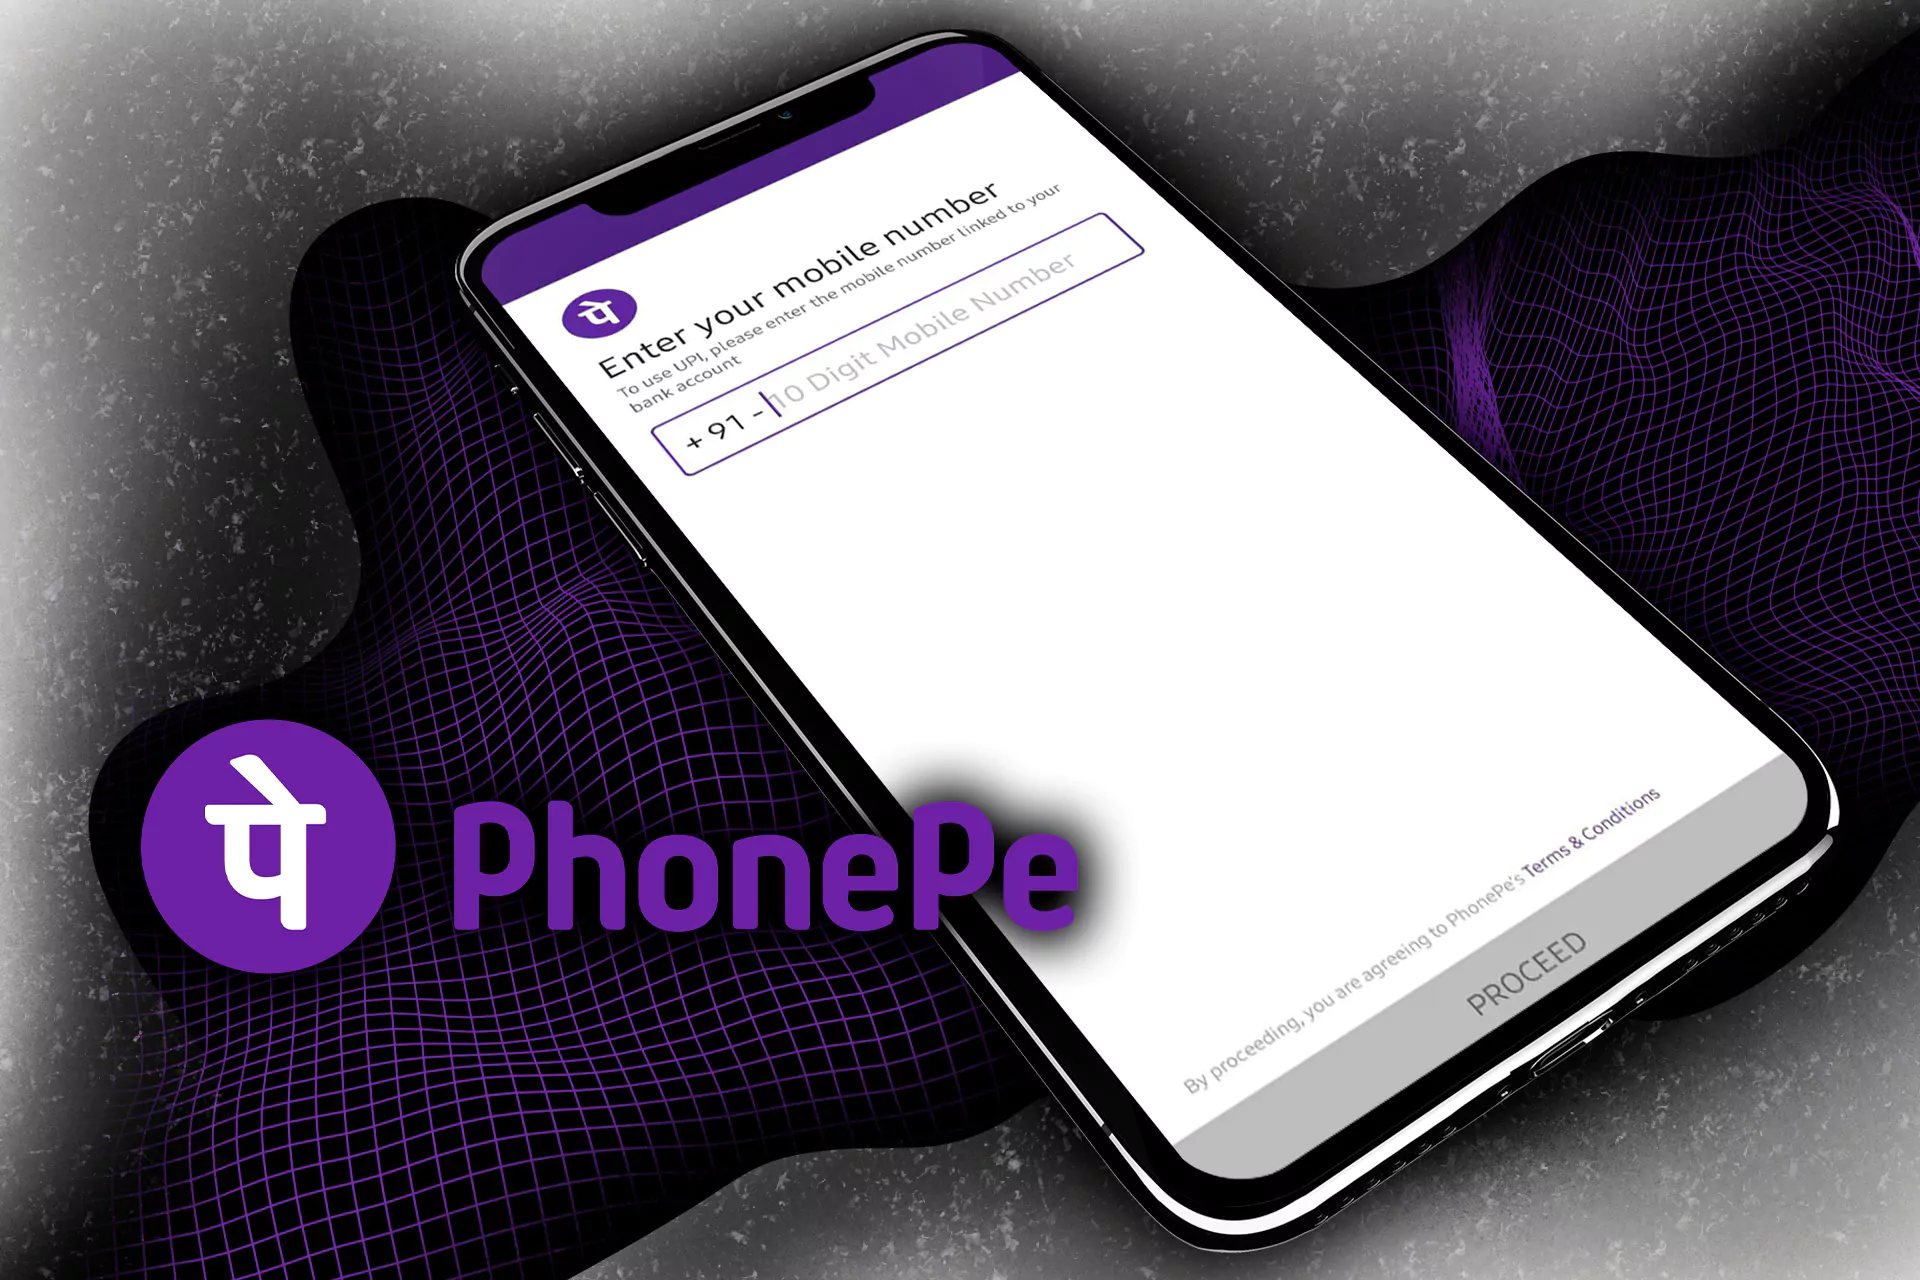 Install the PhonePe app and sign up.